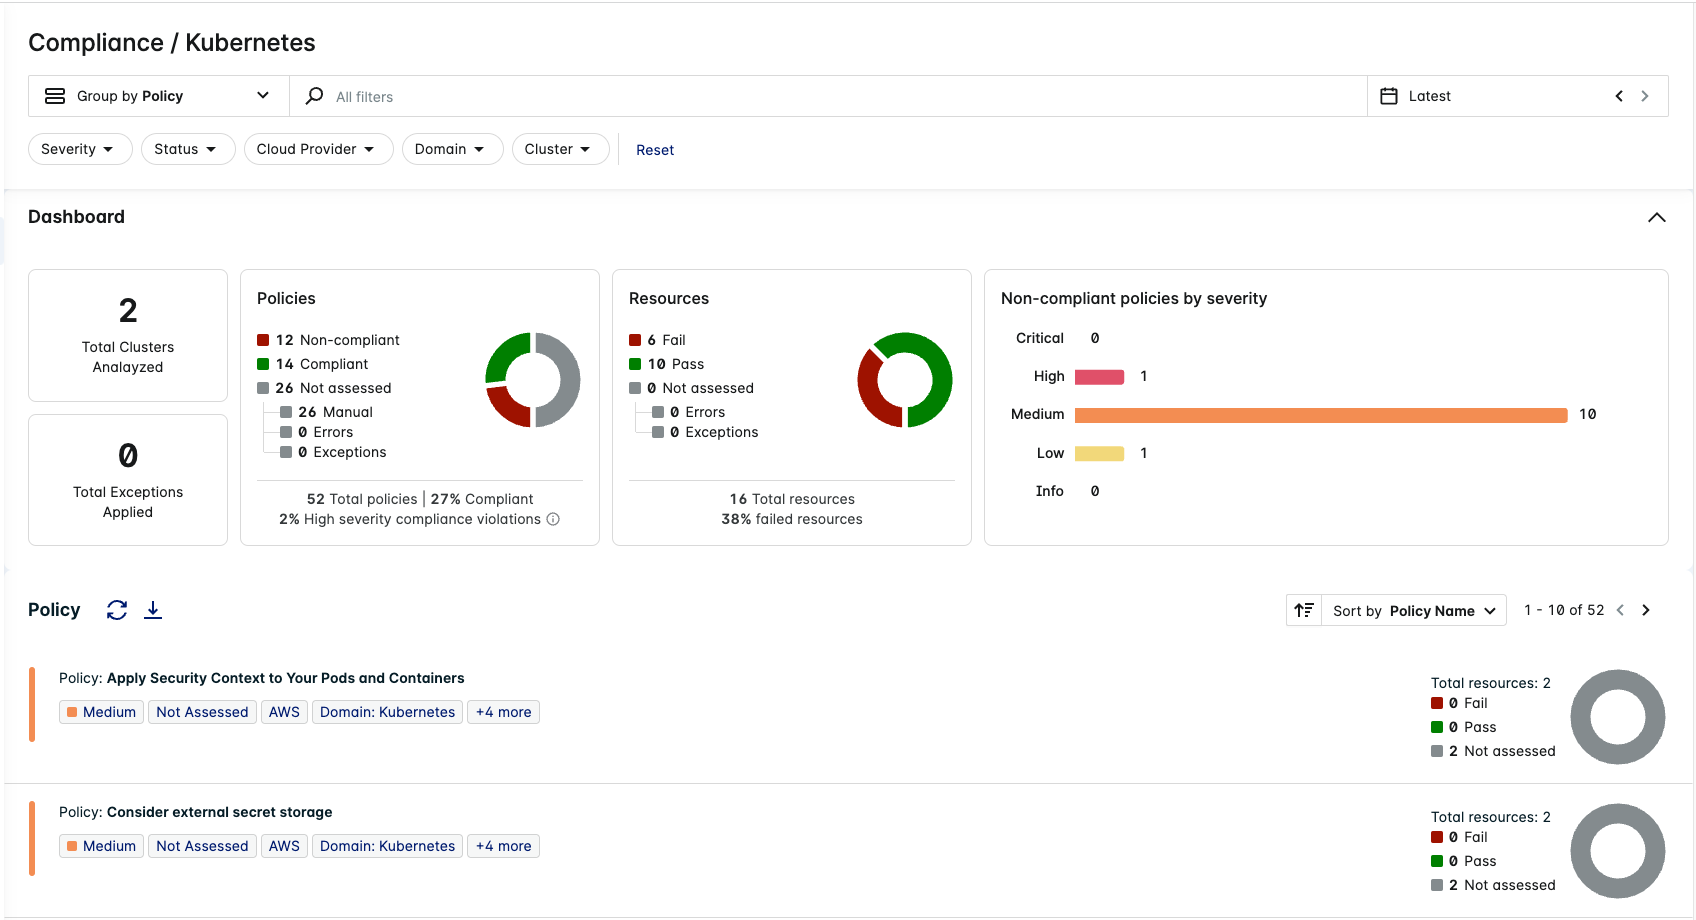 console-k8s-compliance-dashboard-oct2022.png